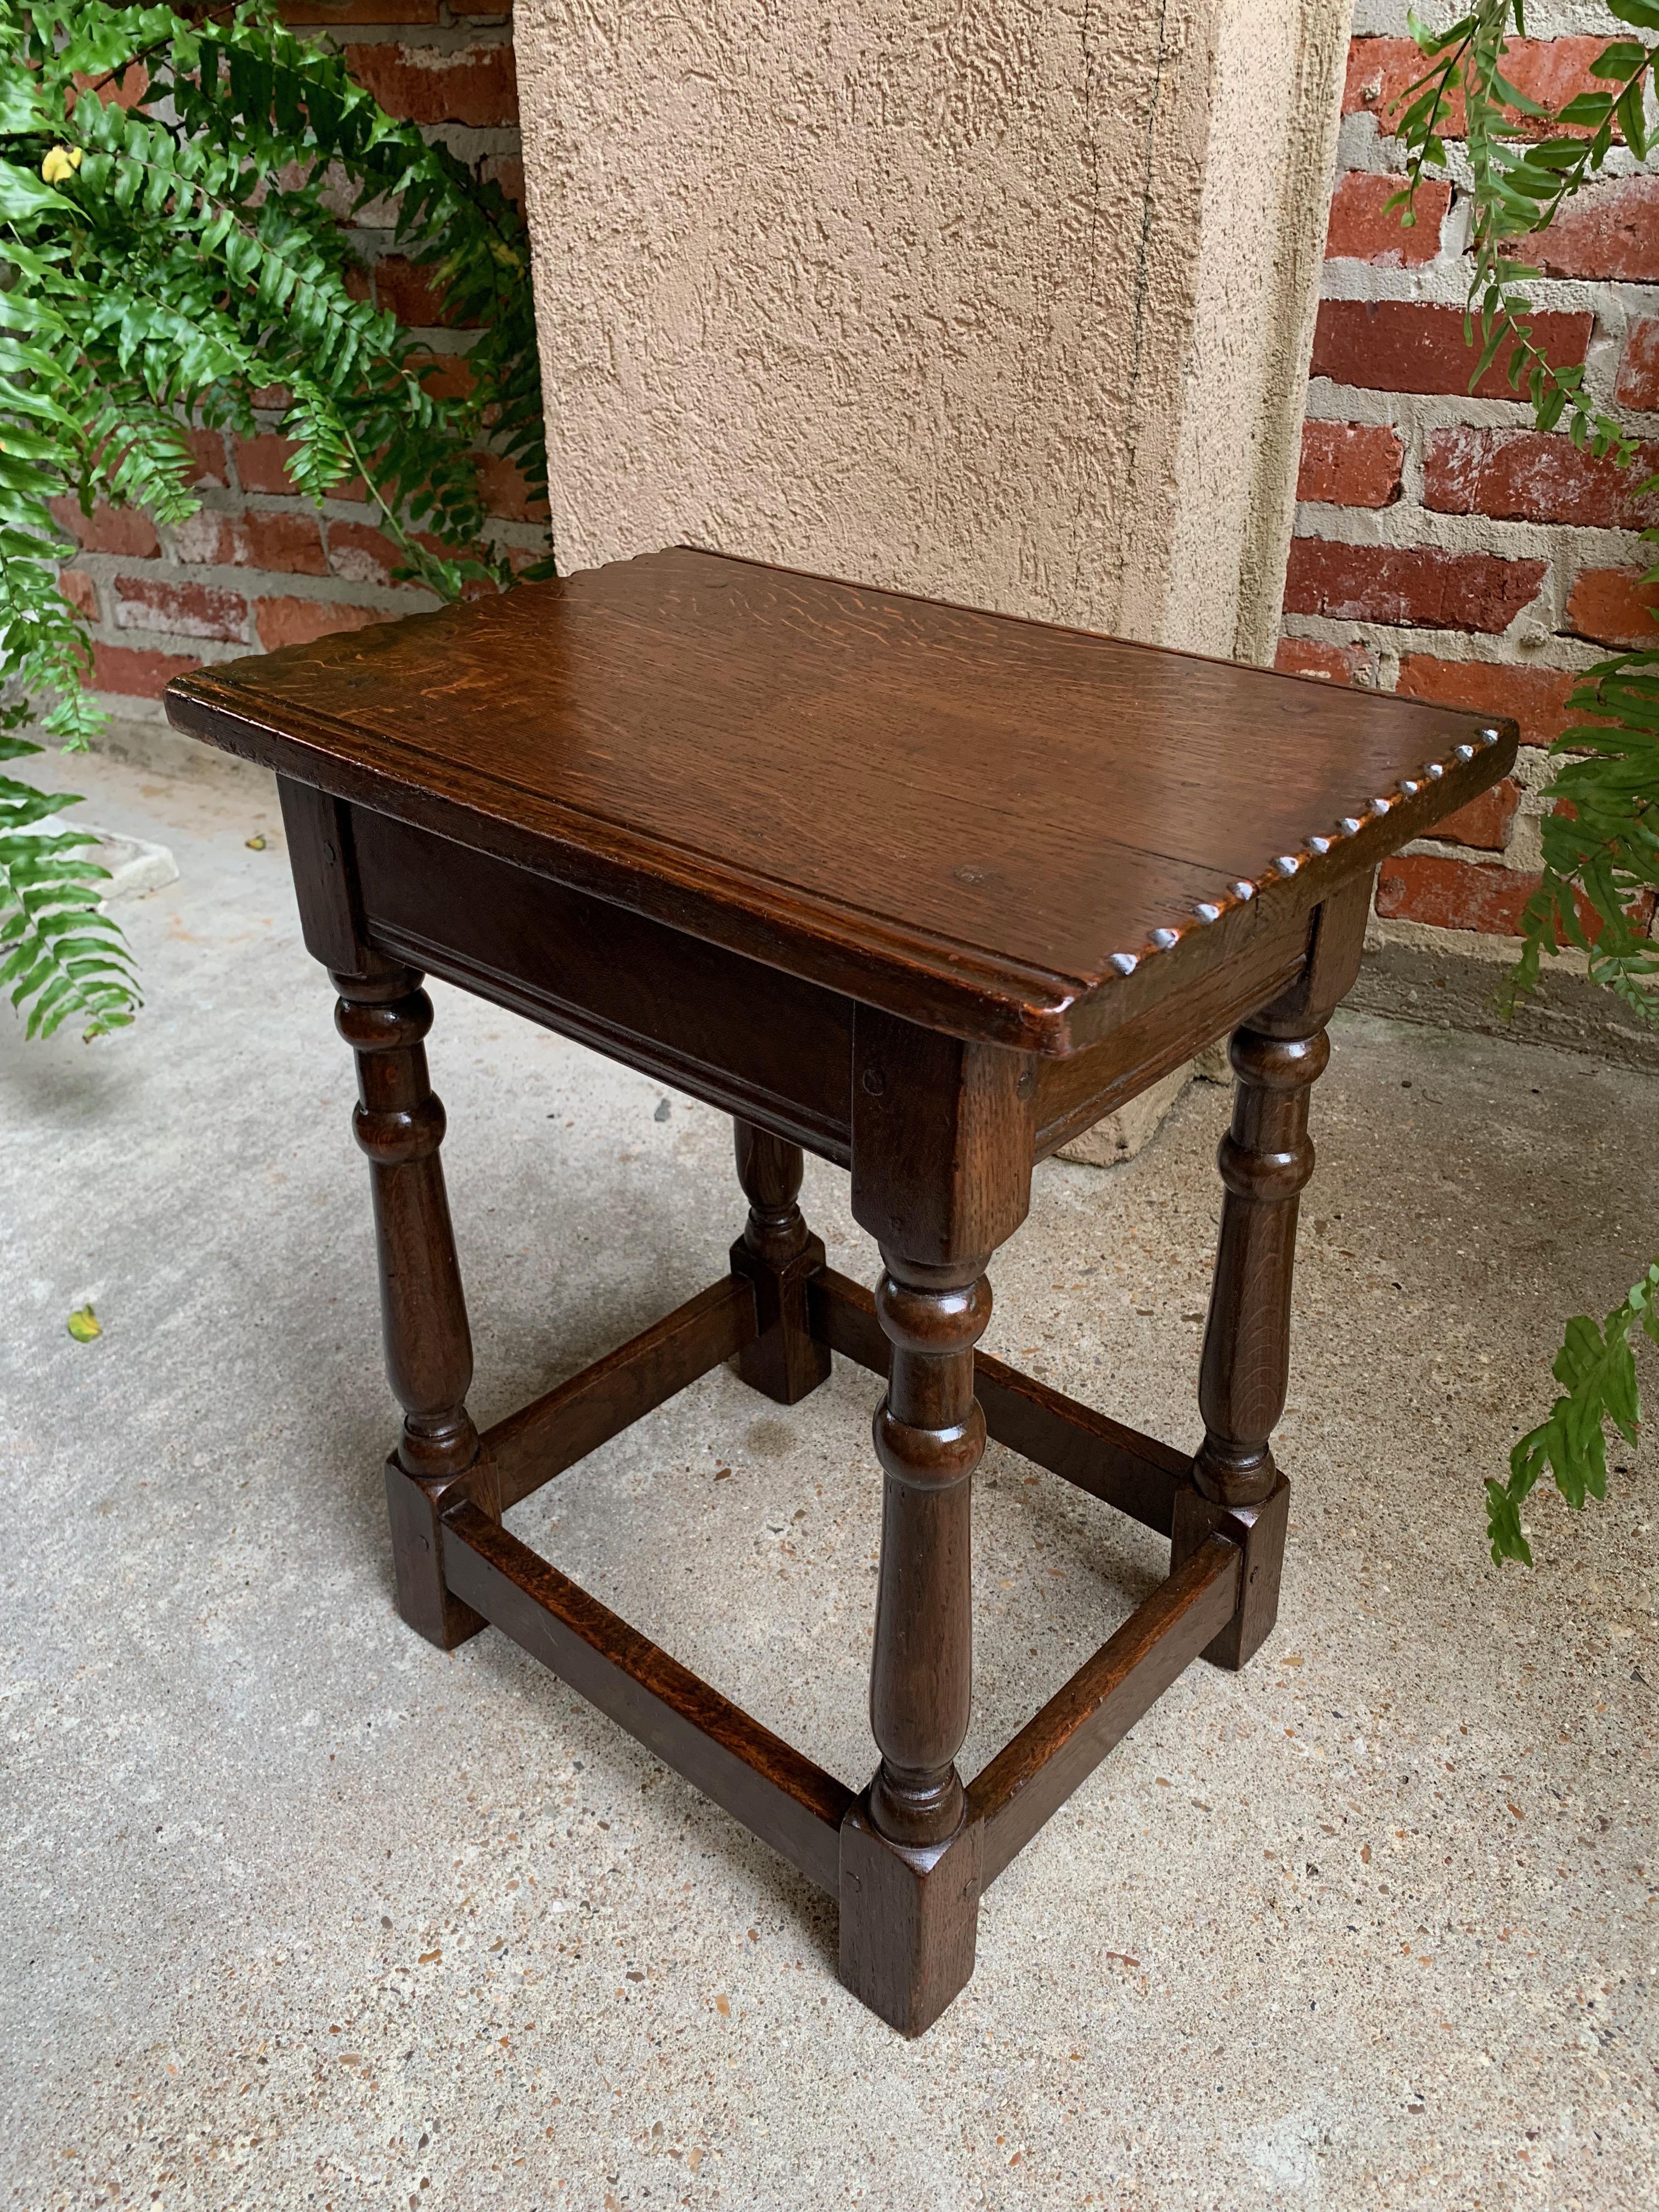 Antique English carved tiger oak Joint stool bench table splayed leg c1900.

~Direct from England, one of the most asked for antiques in our inventory!~
~Lovely antique English oak bench or stool (or petite side table).~
~Reeded and carved edge top